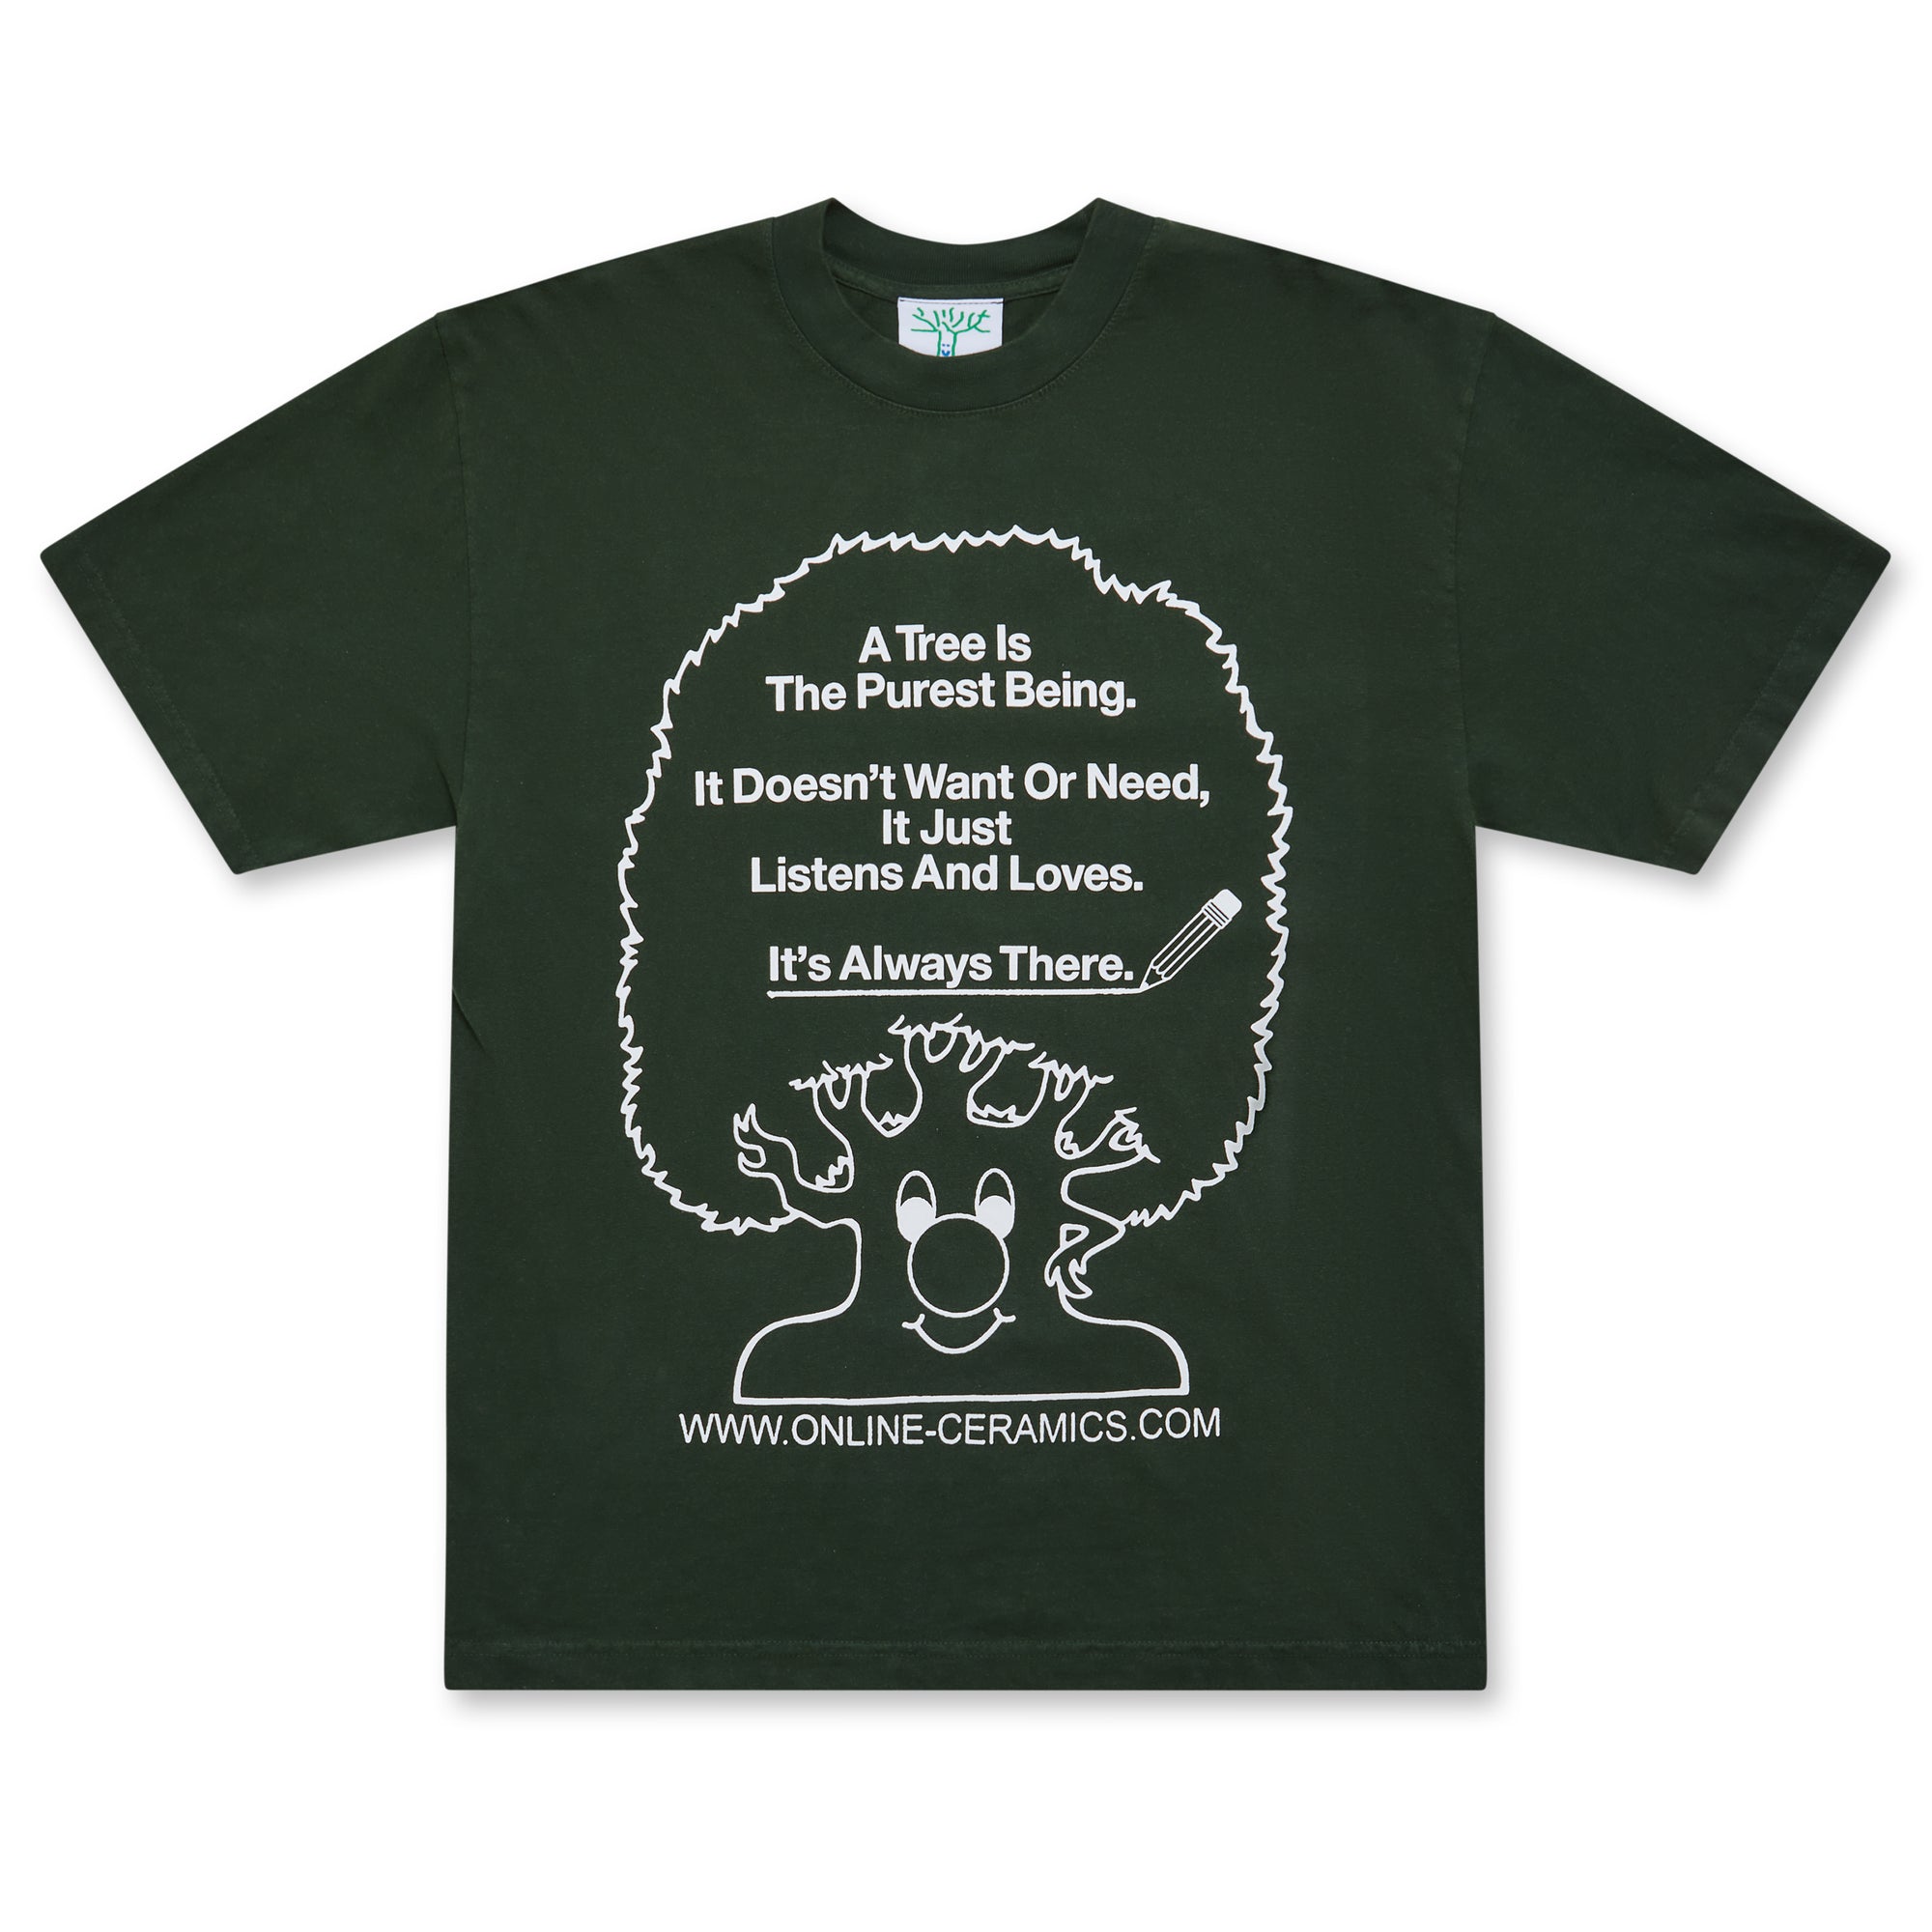 Online Ceramics - A Tree Is The Purest Being Tee - (Ivy) view 1